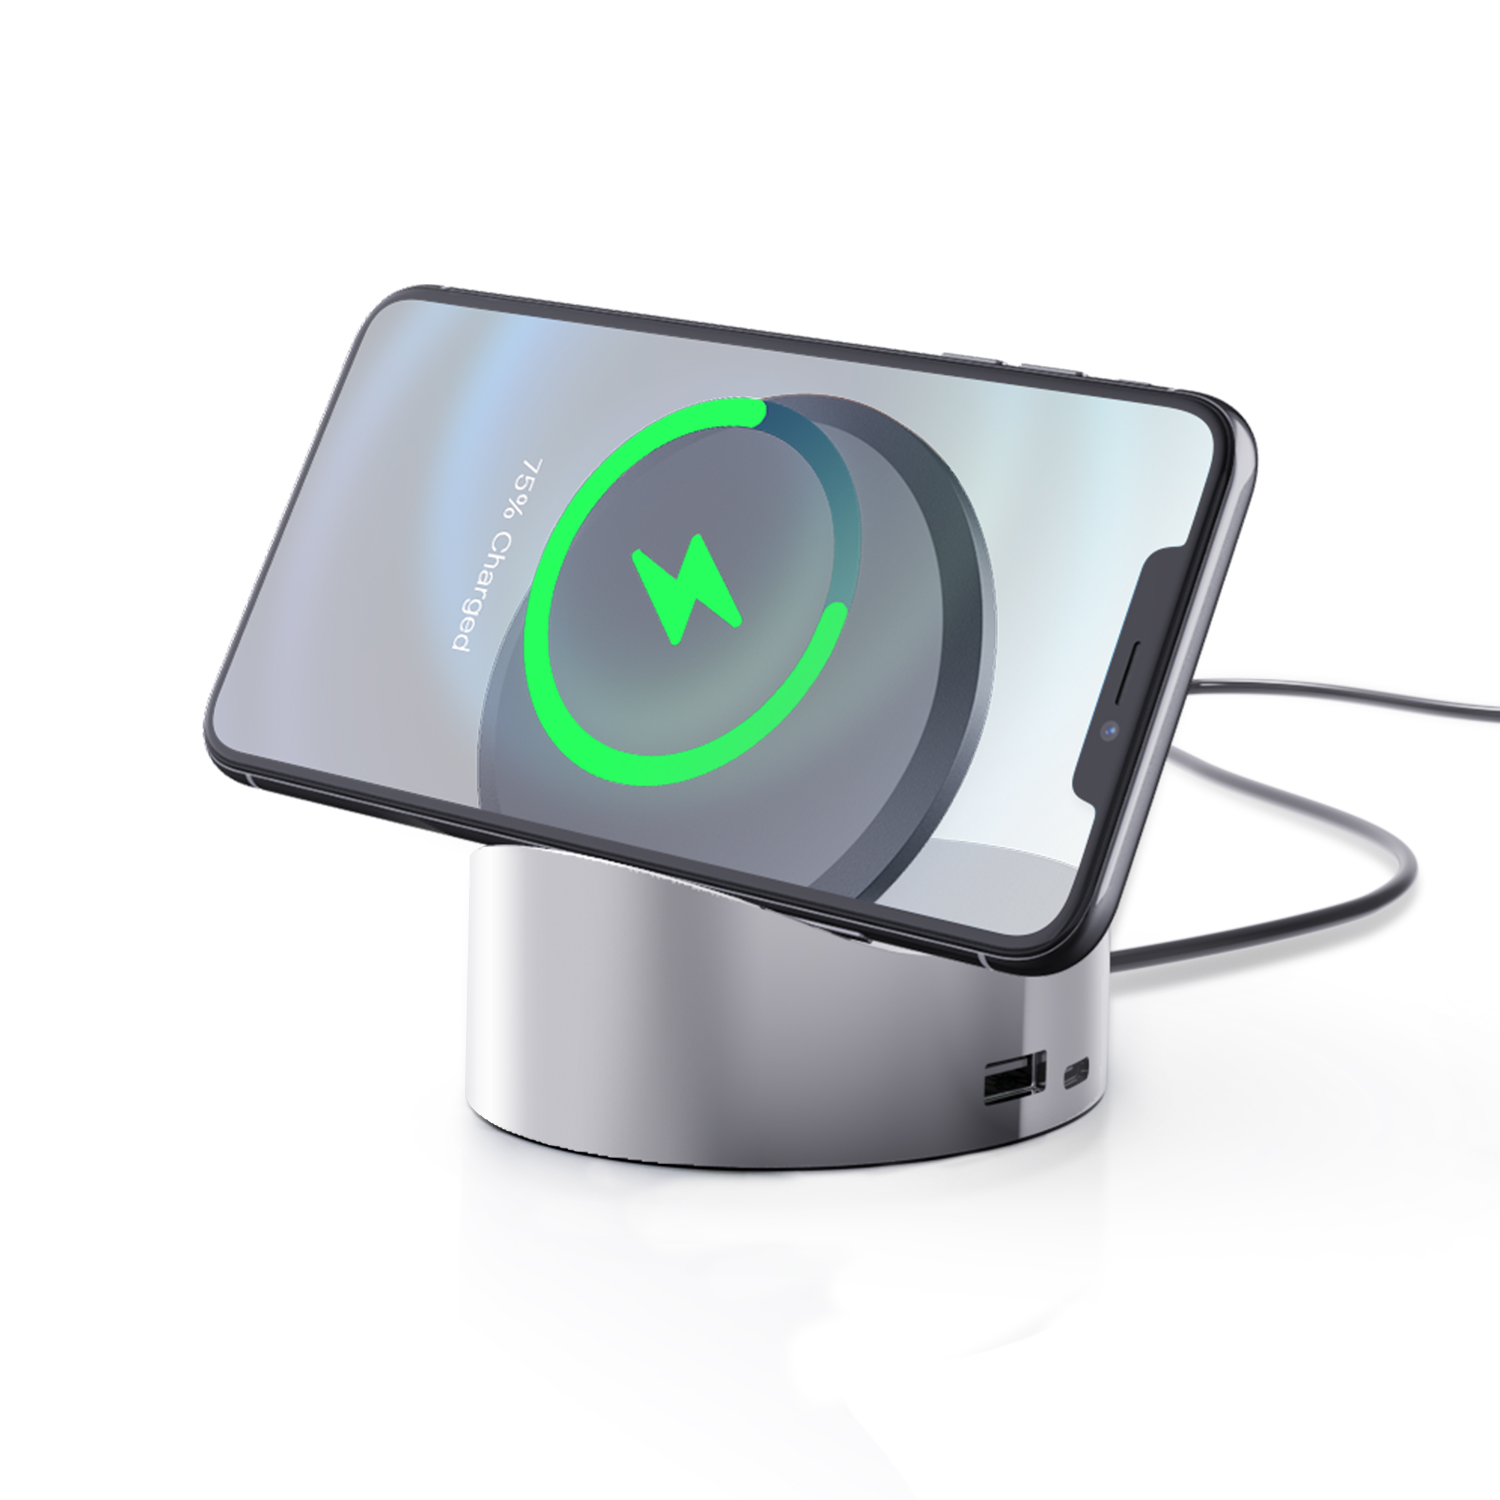 Desktop Type Wireless Charger AW01 Featured Image